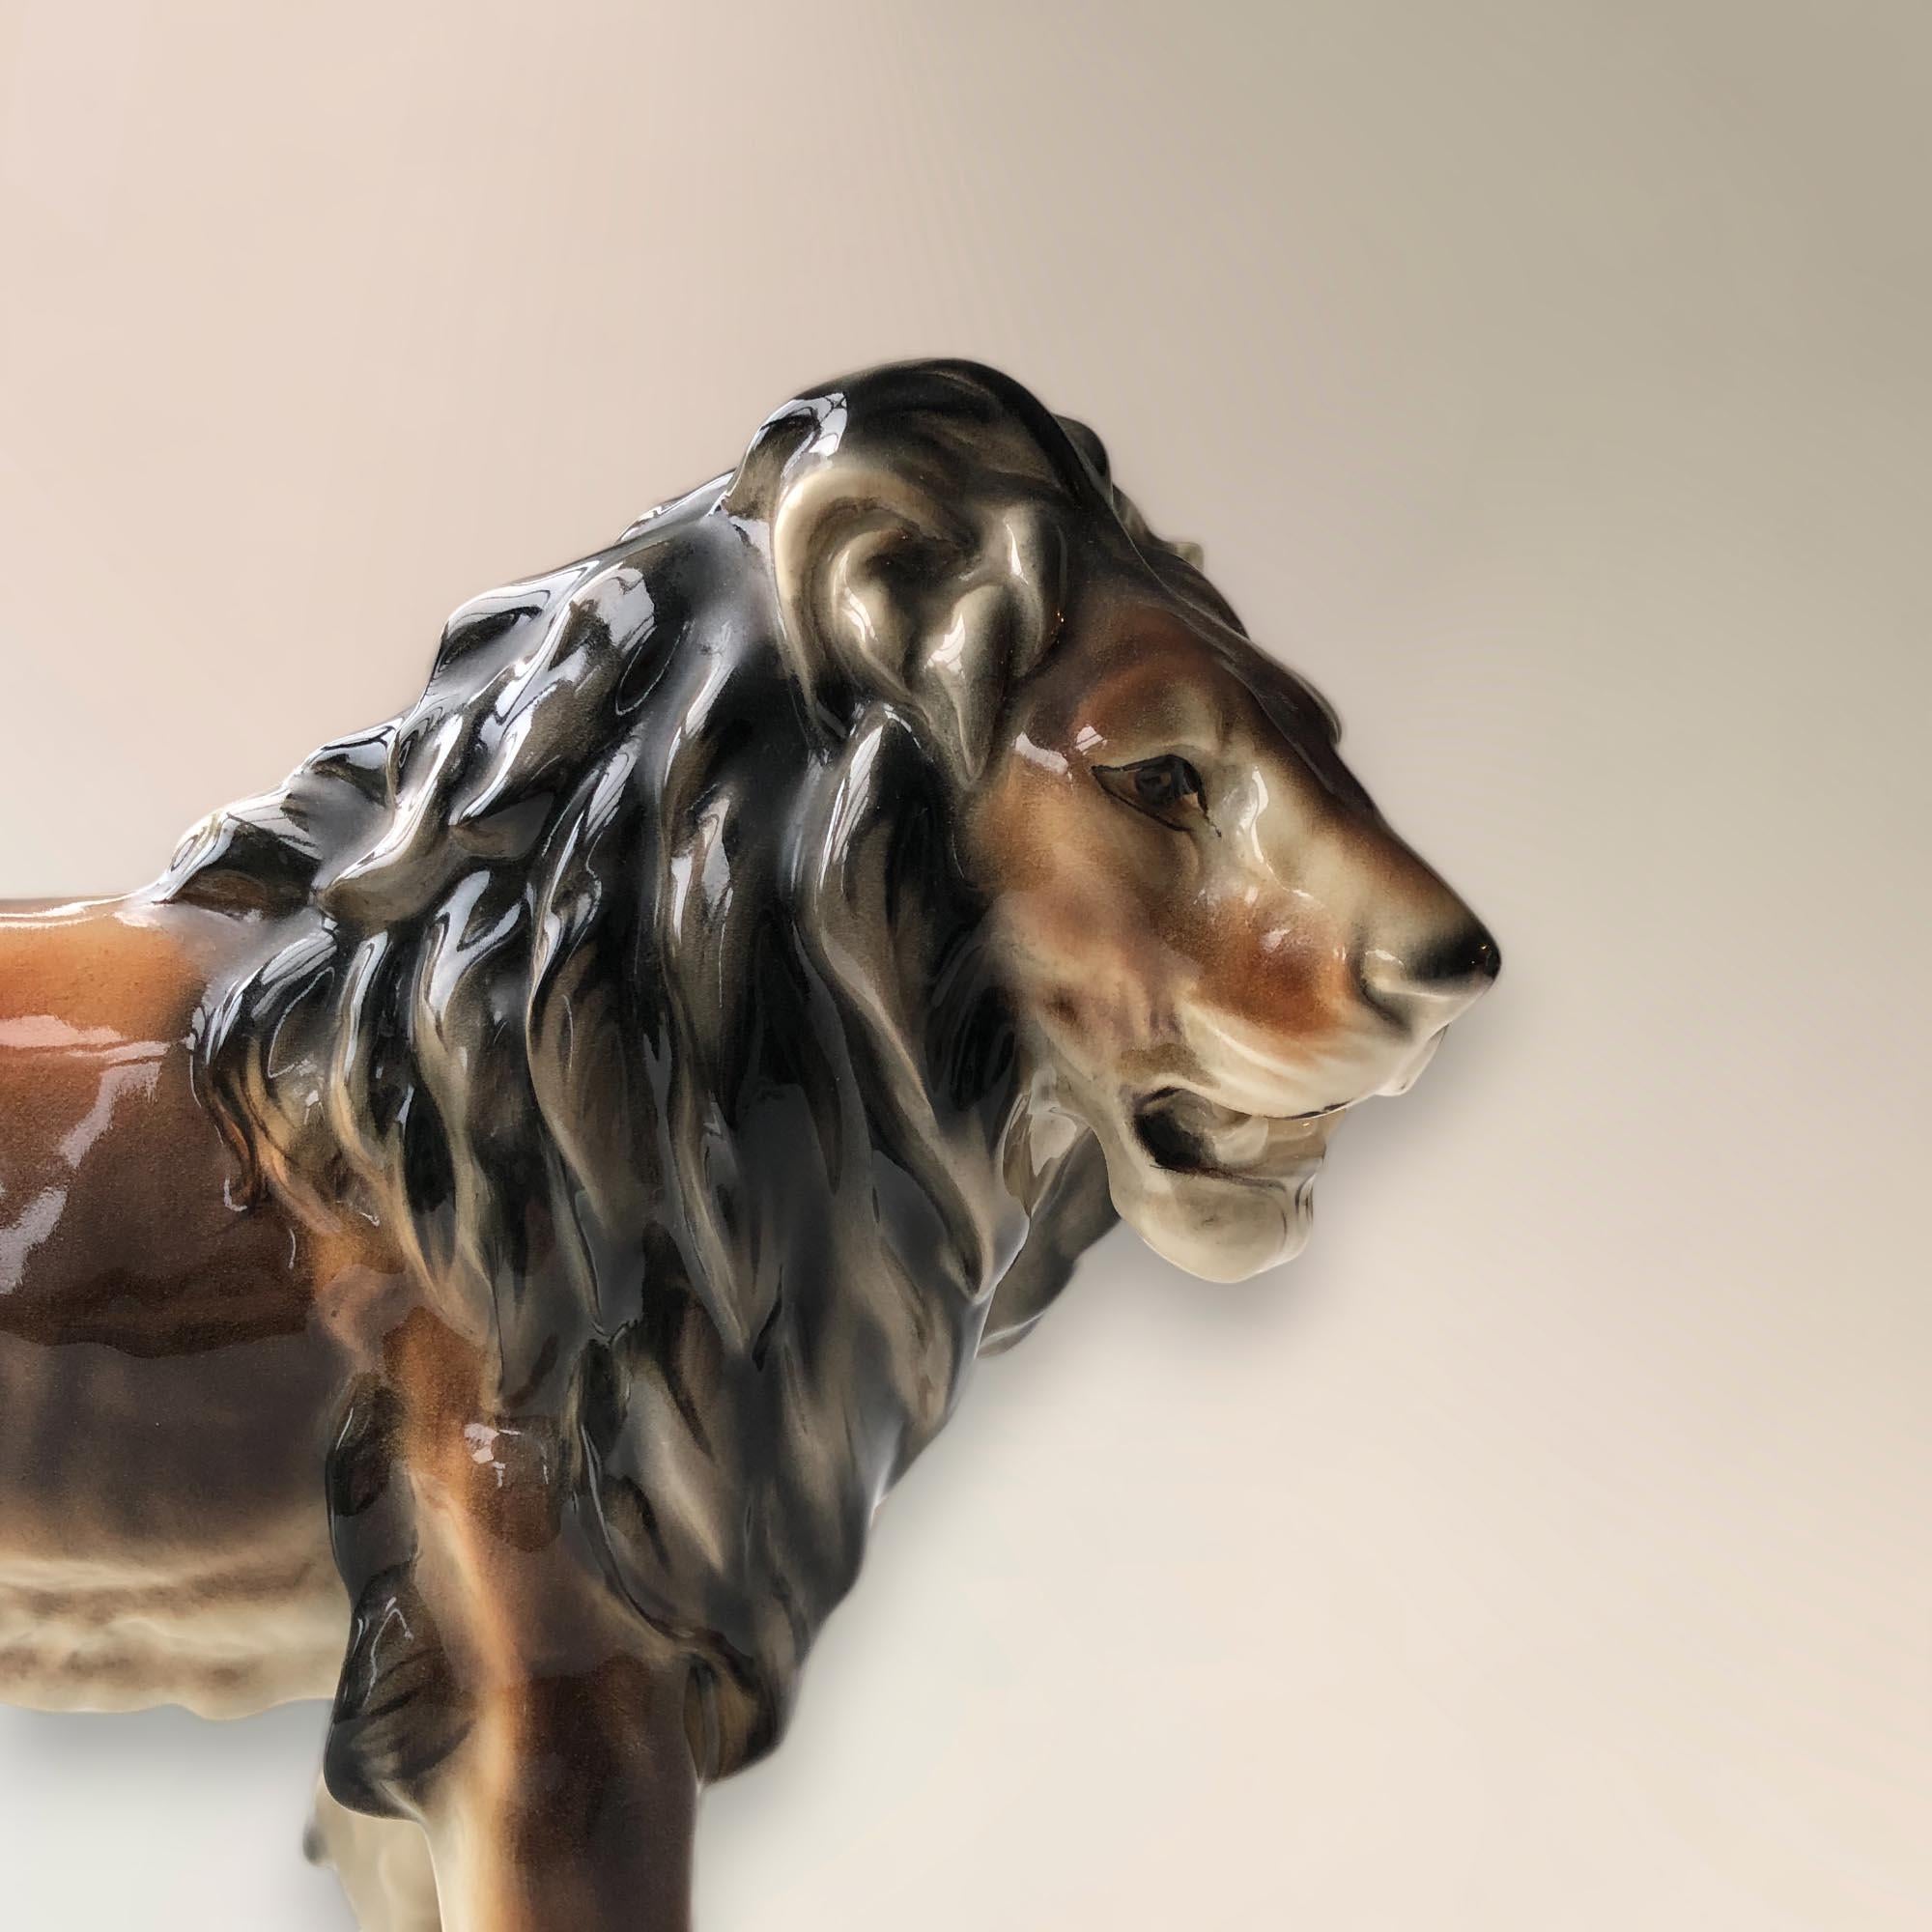 Beautiful vintage statue of a lion in porcelain. This figurine shows no damage and has a stamp at the bottom of the leg.

Unknown, 1950s

Designer/Manufacturer: See stamp

In very good condition. No damages.

Dimensions: 30 (H) x 45 (W) x 14 cm (D)